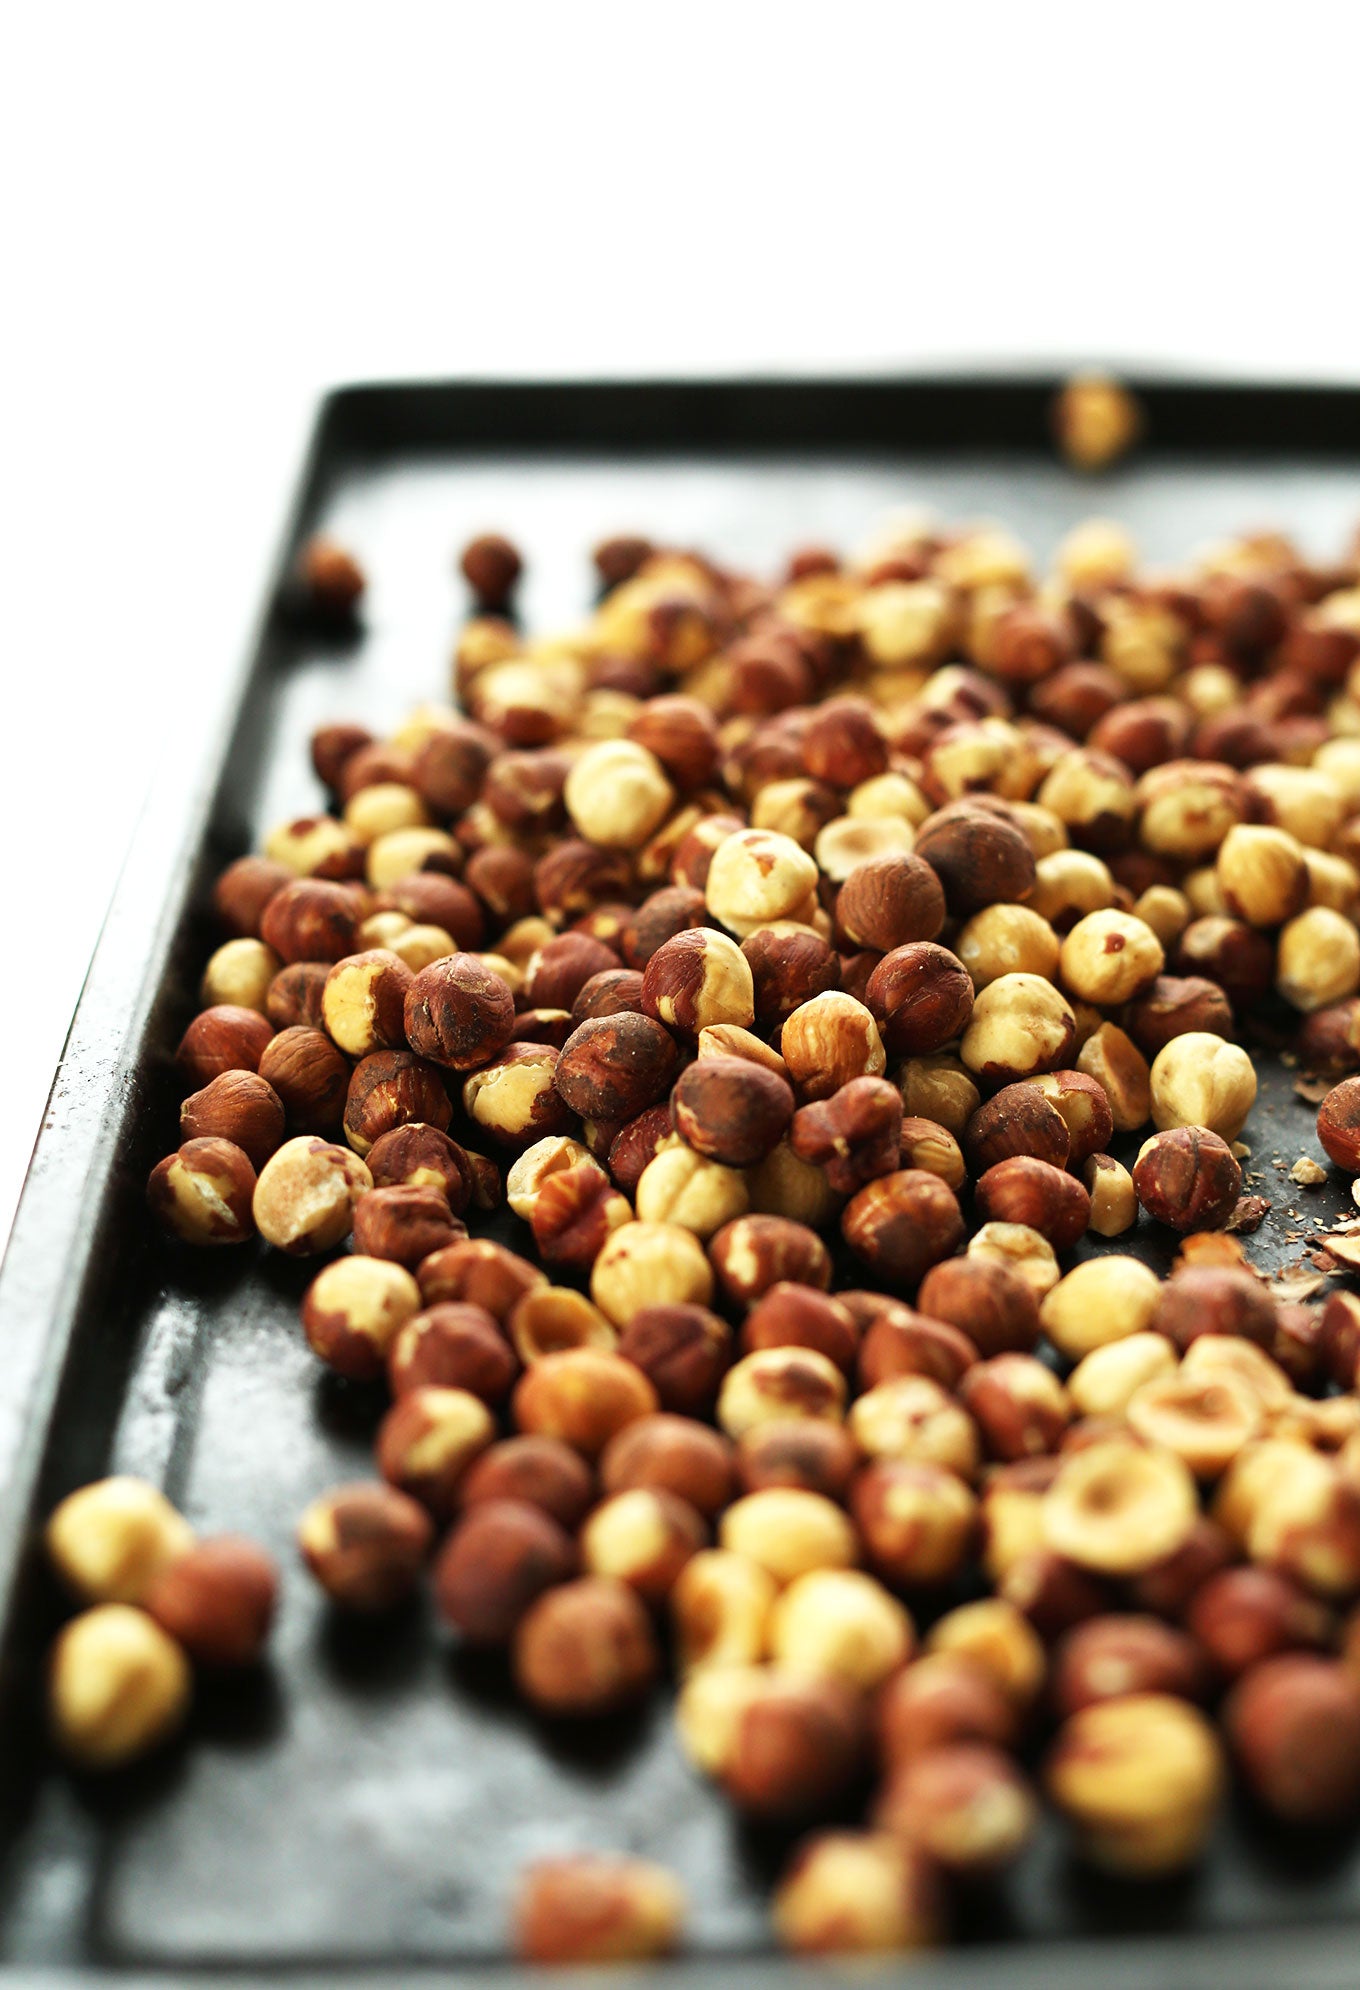 Oven-roasted hazelnuts spread out on parchment paper